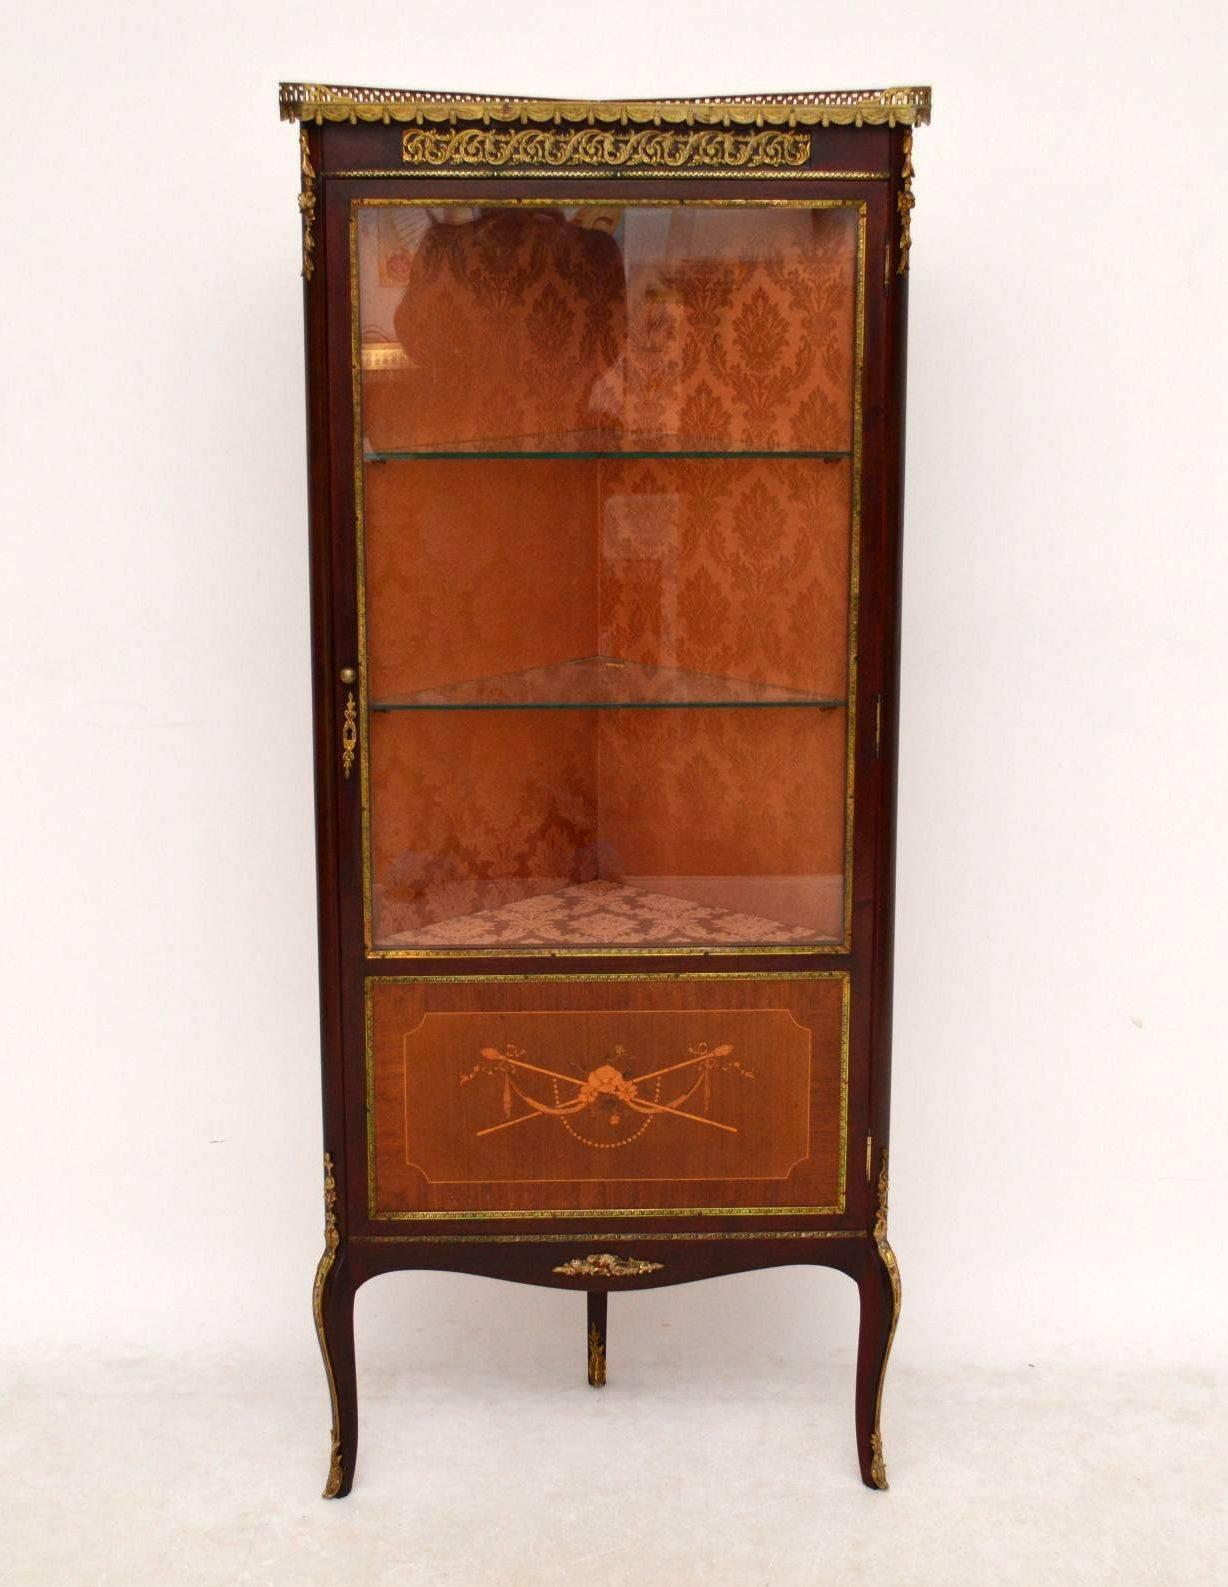 Antique French glazed corner cabinet with wonderful quality gilt mounts and a pierced gilt metal gallery. It's in lovely original condition and is fine quality throughout. Behind the door are two glass shelves and the original lining fabric which is